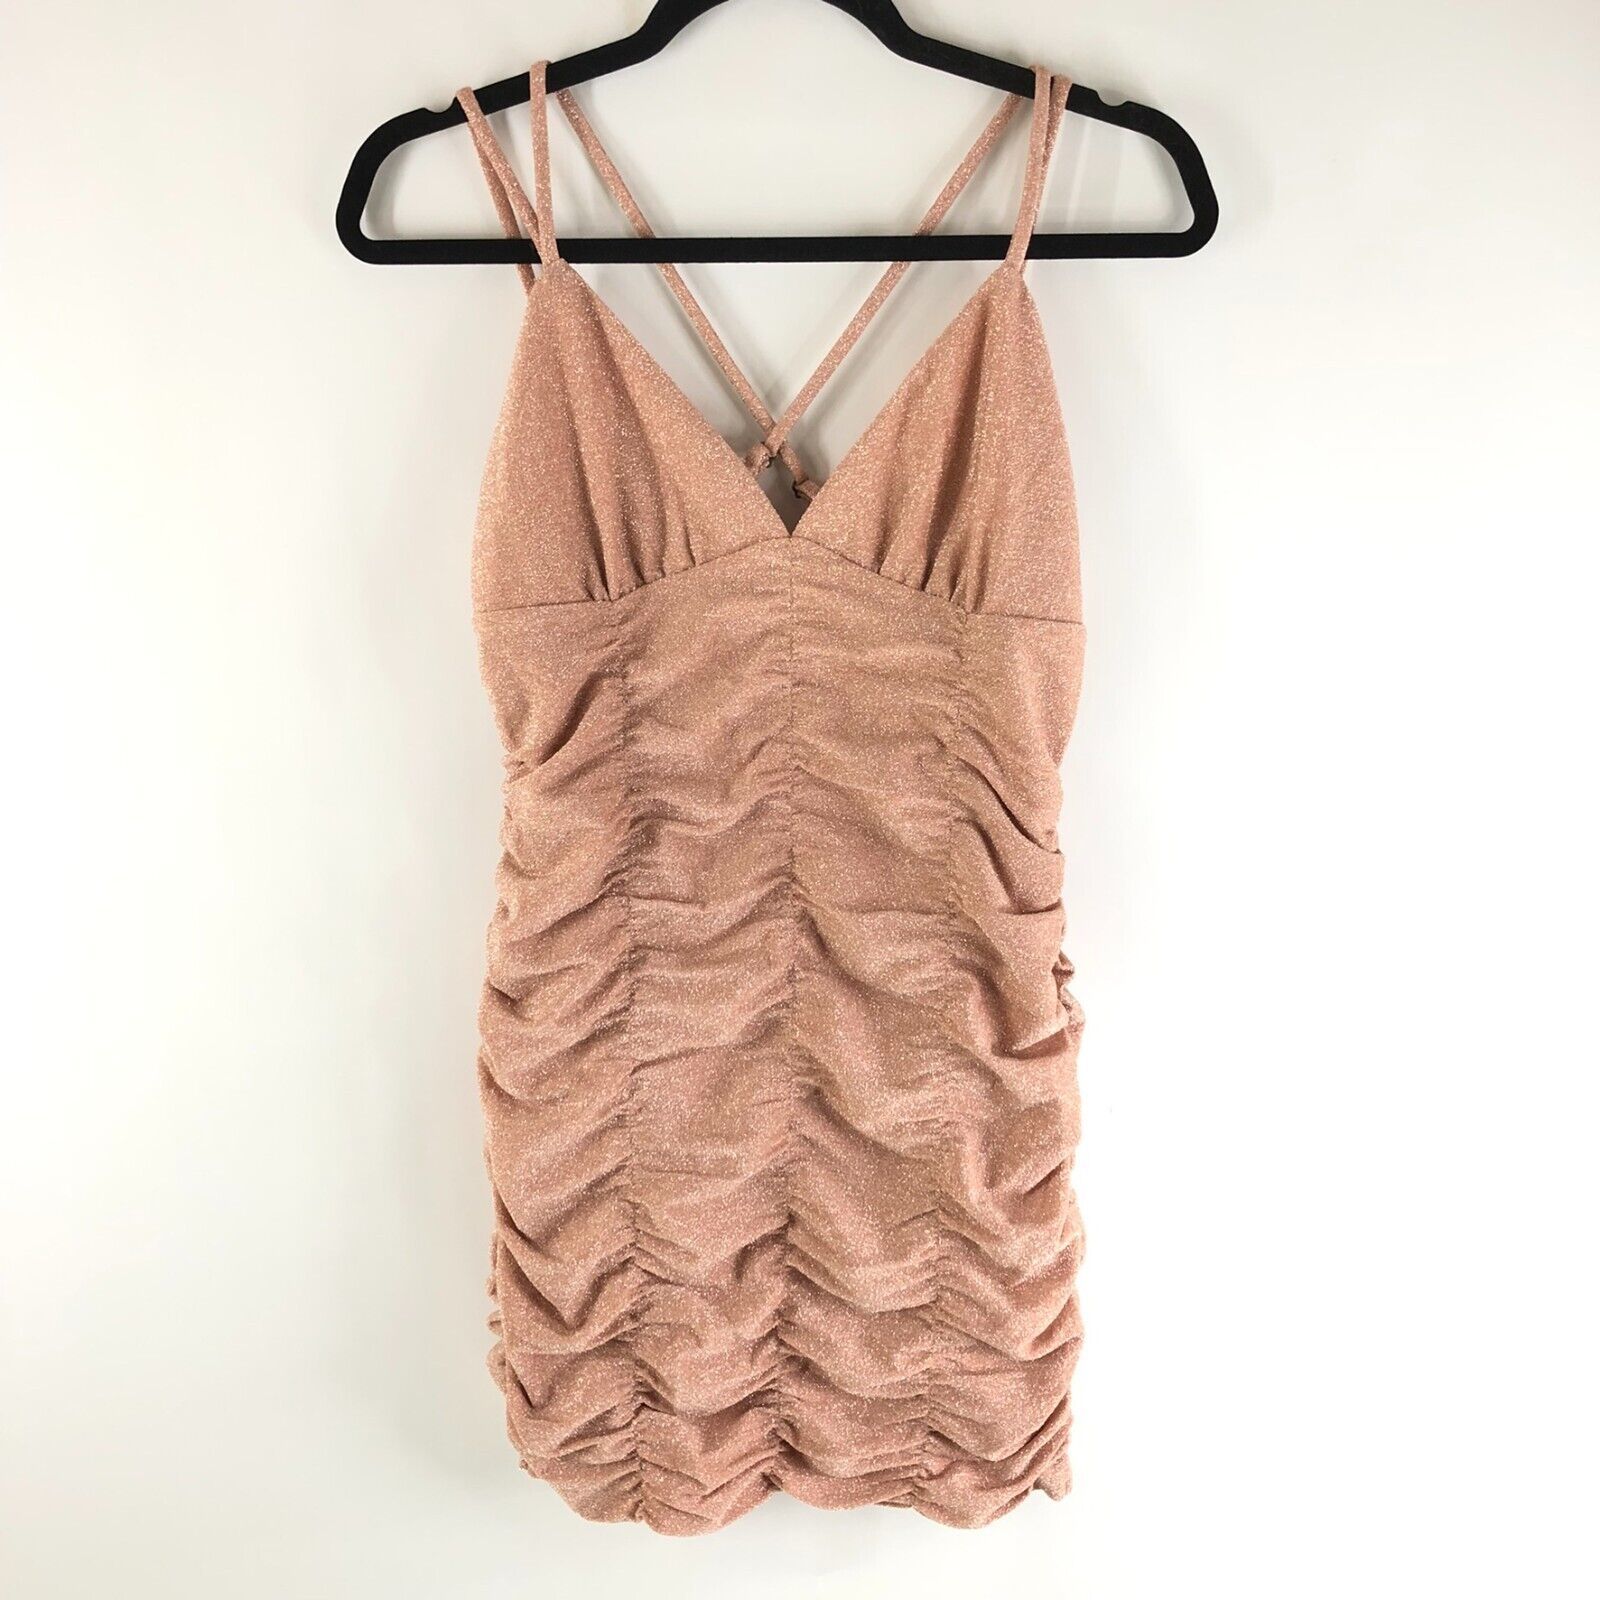 Primary image for Wild Fable Mini Dress Metallic Ruched Ruffle Sleeveless Stretch Blush Pink S